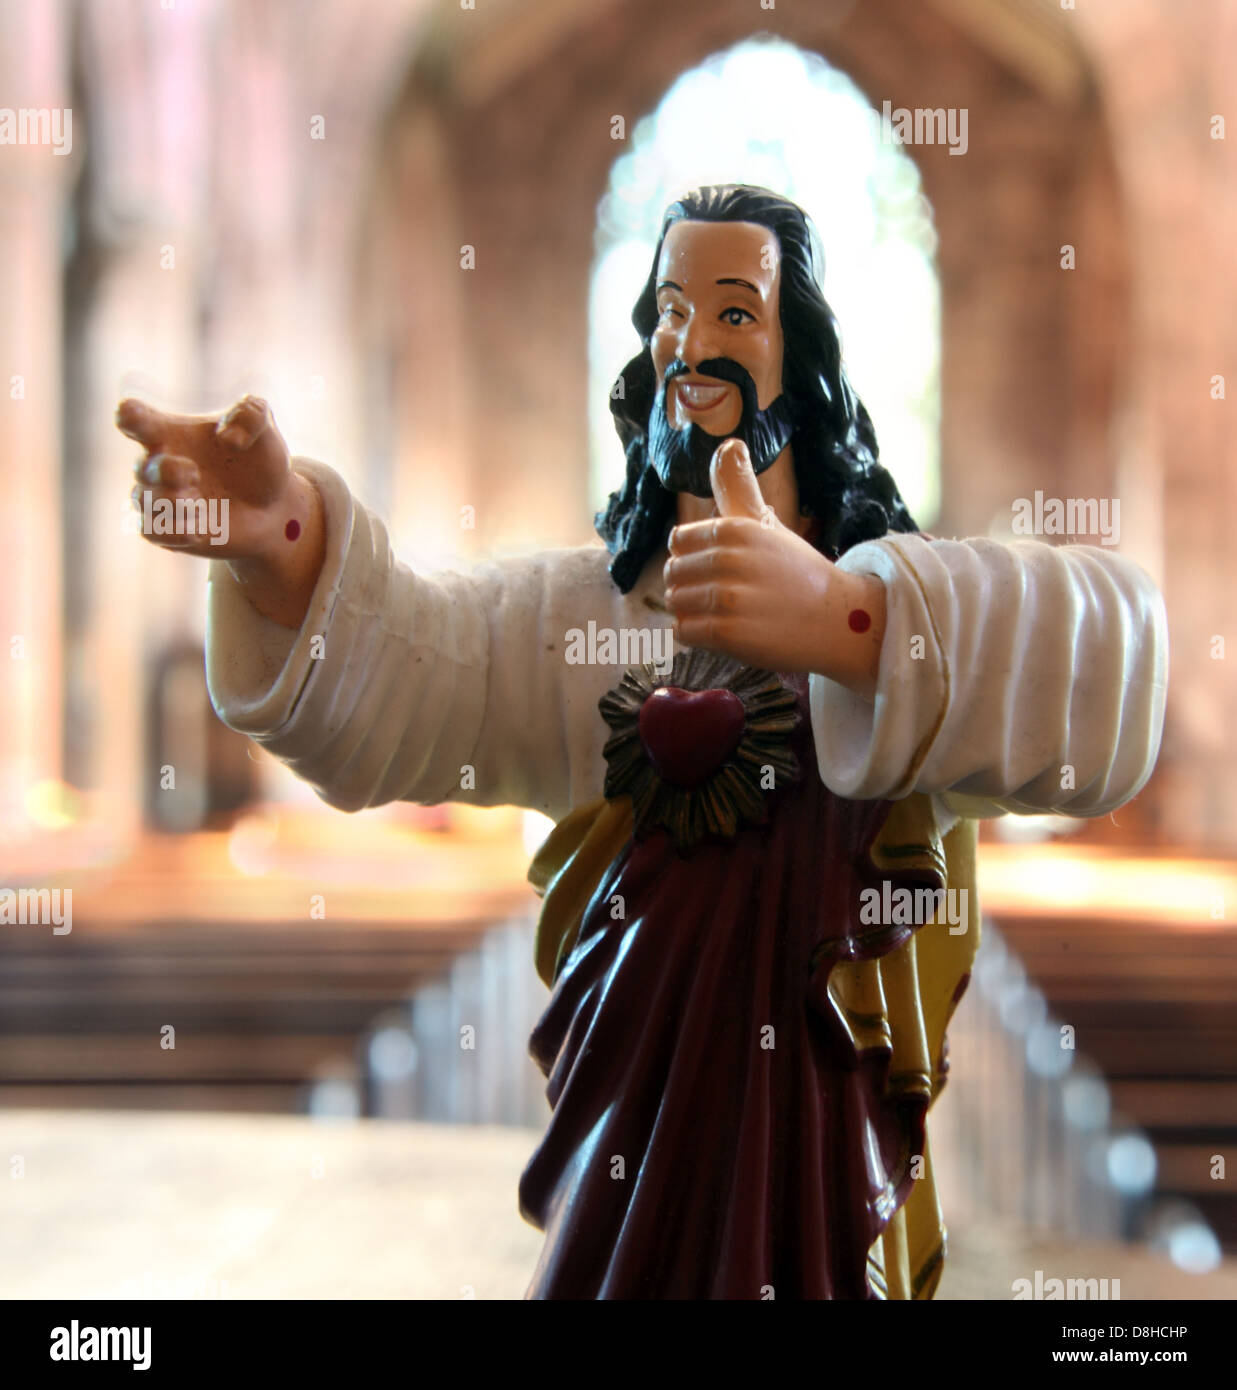 Buddy Christ Statue In A Catholic Church, Acceptable Face Of Christianity From The Film Dogma Stock Photo - Alamy